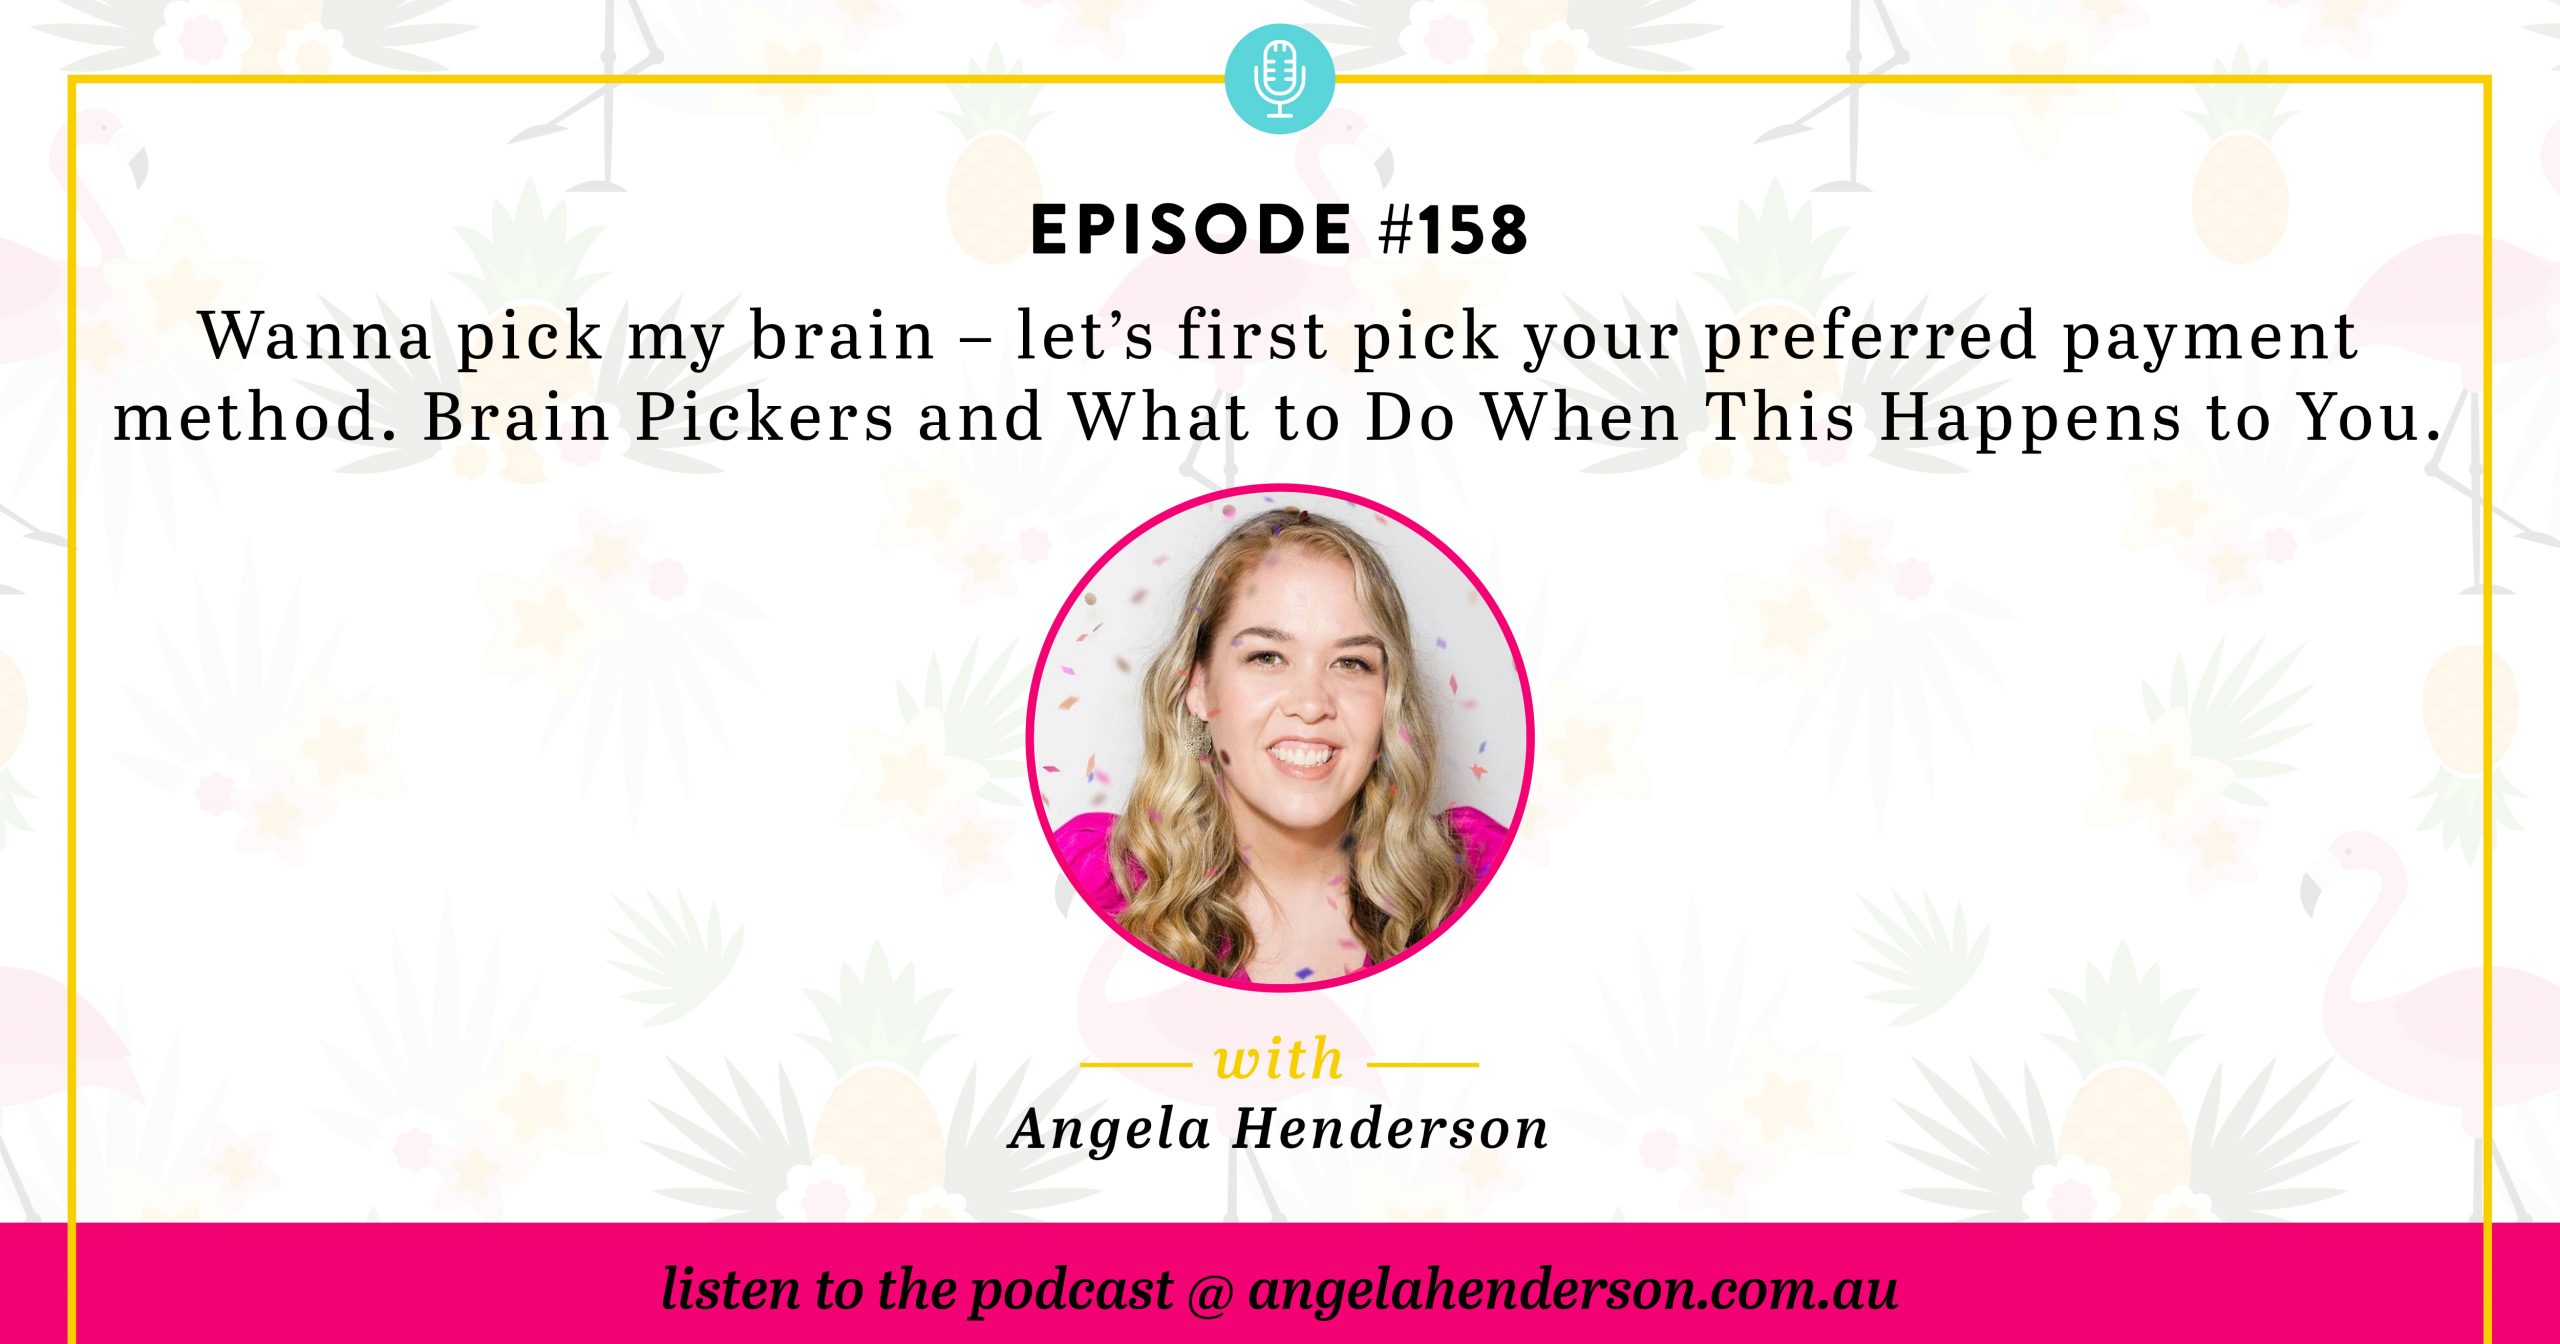 Wanna pick my brain – let’s first pick your preferred payment method. Brain Pickers and What to Do When This Happens to You.